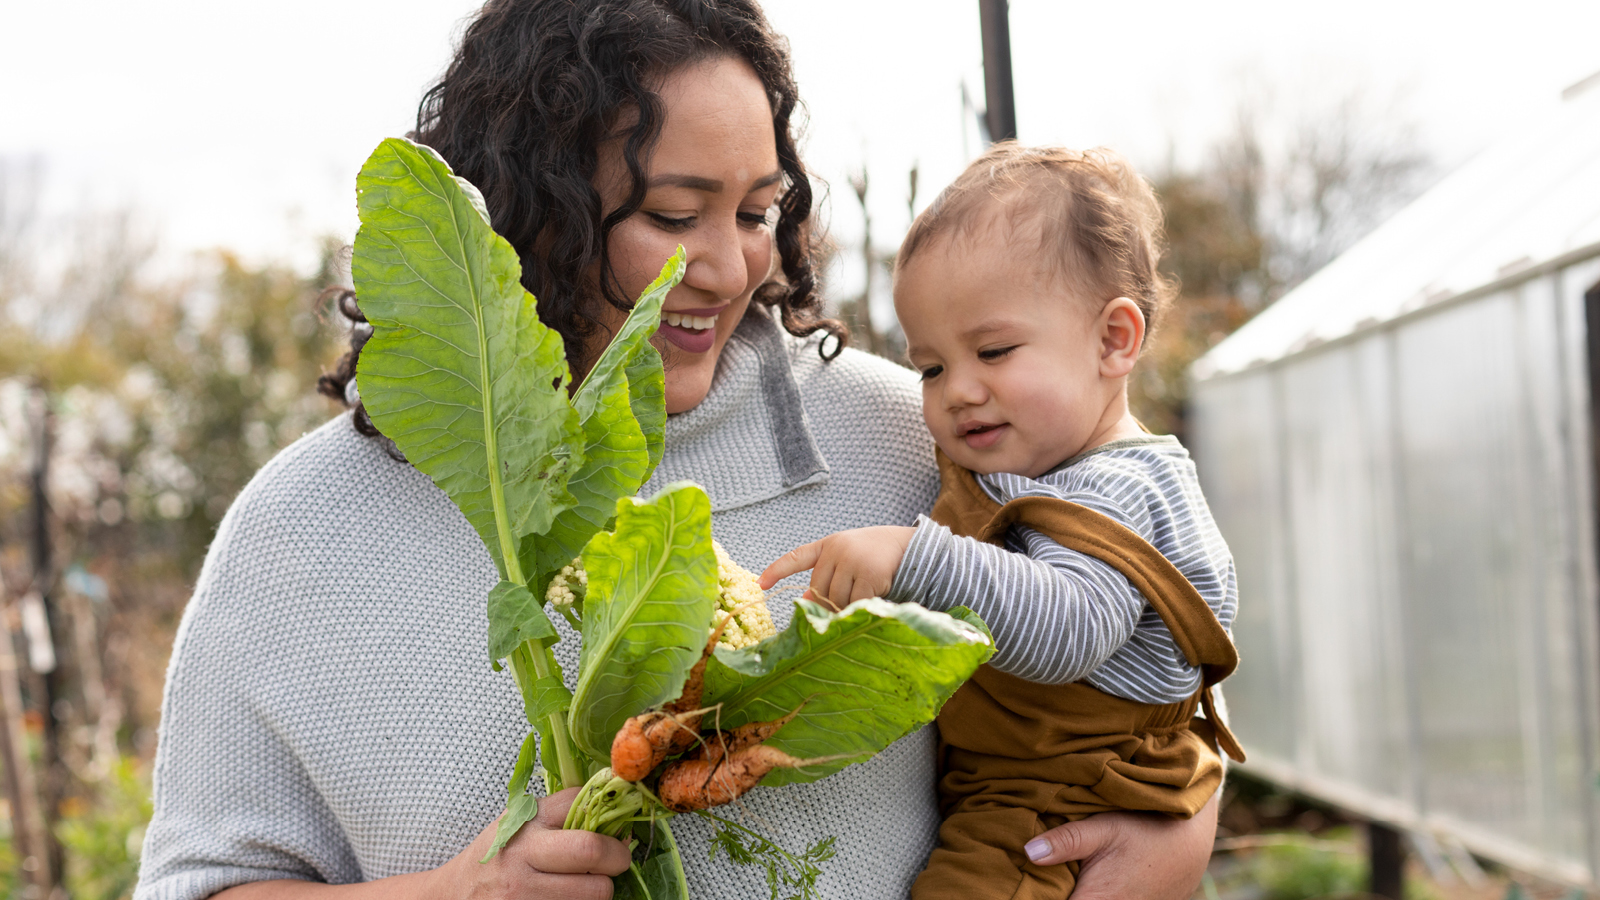 A woman and child look at a plant 